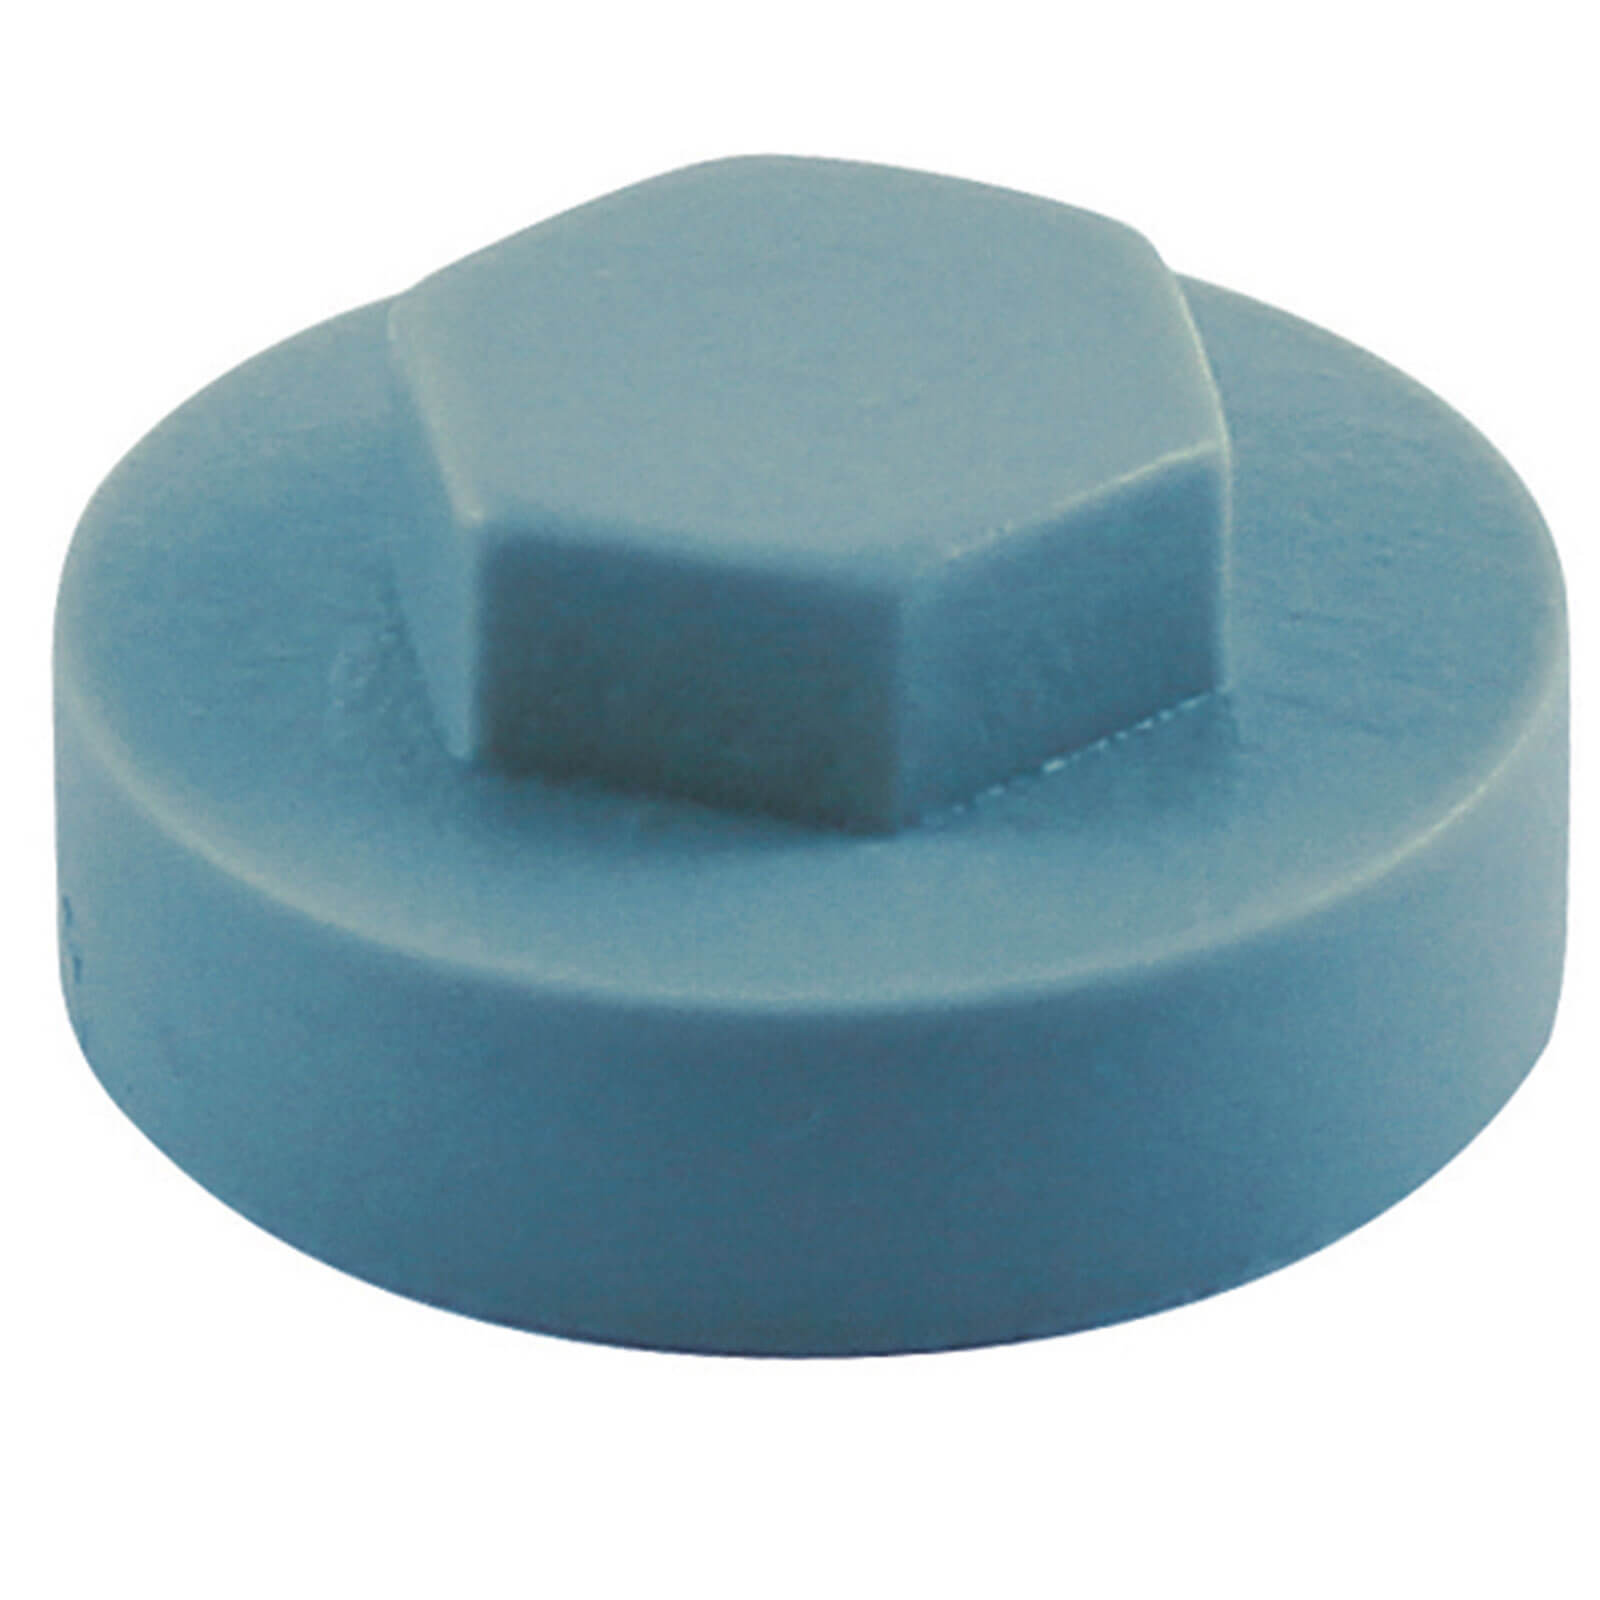 Image of Colour Match Hexagon Screw Cover Cap 5/16" x 16mm Slate Blue Pack of 1000